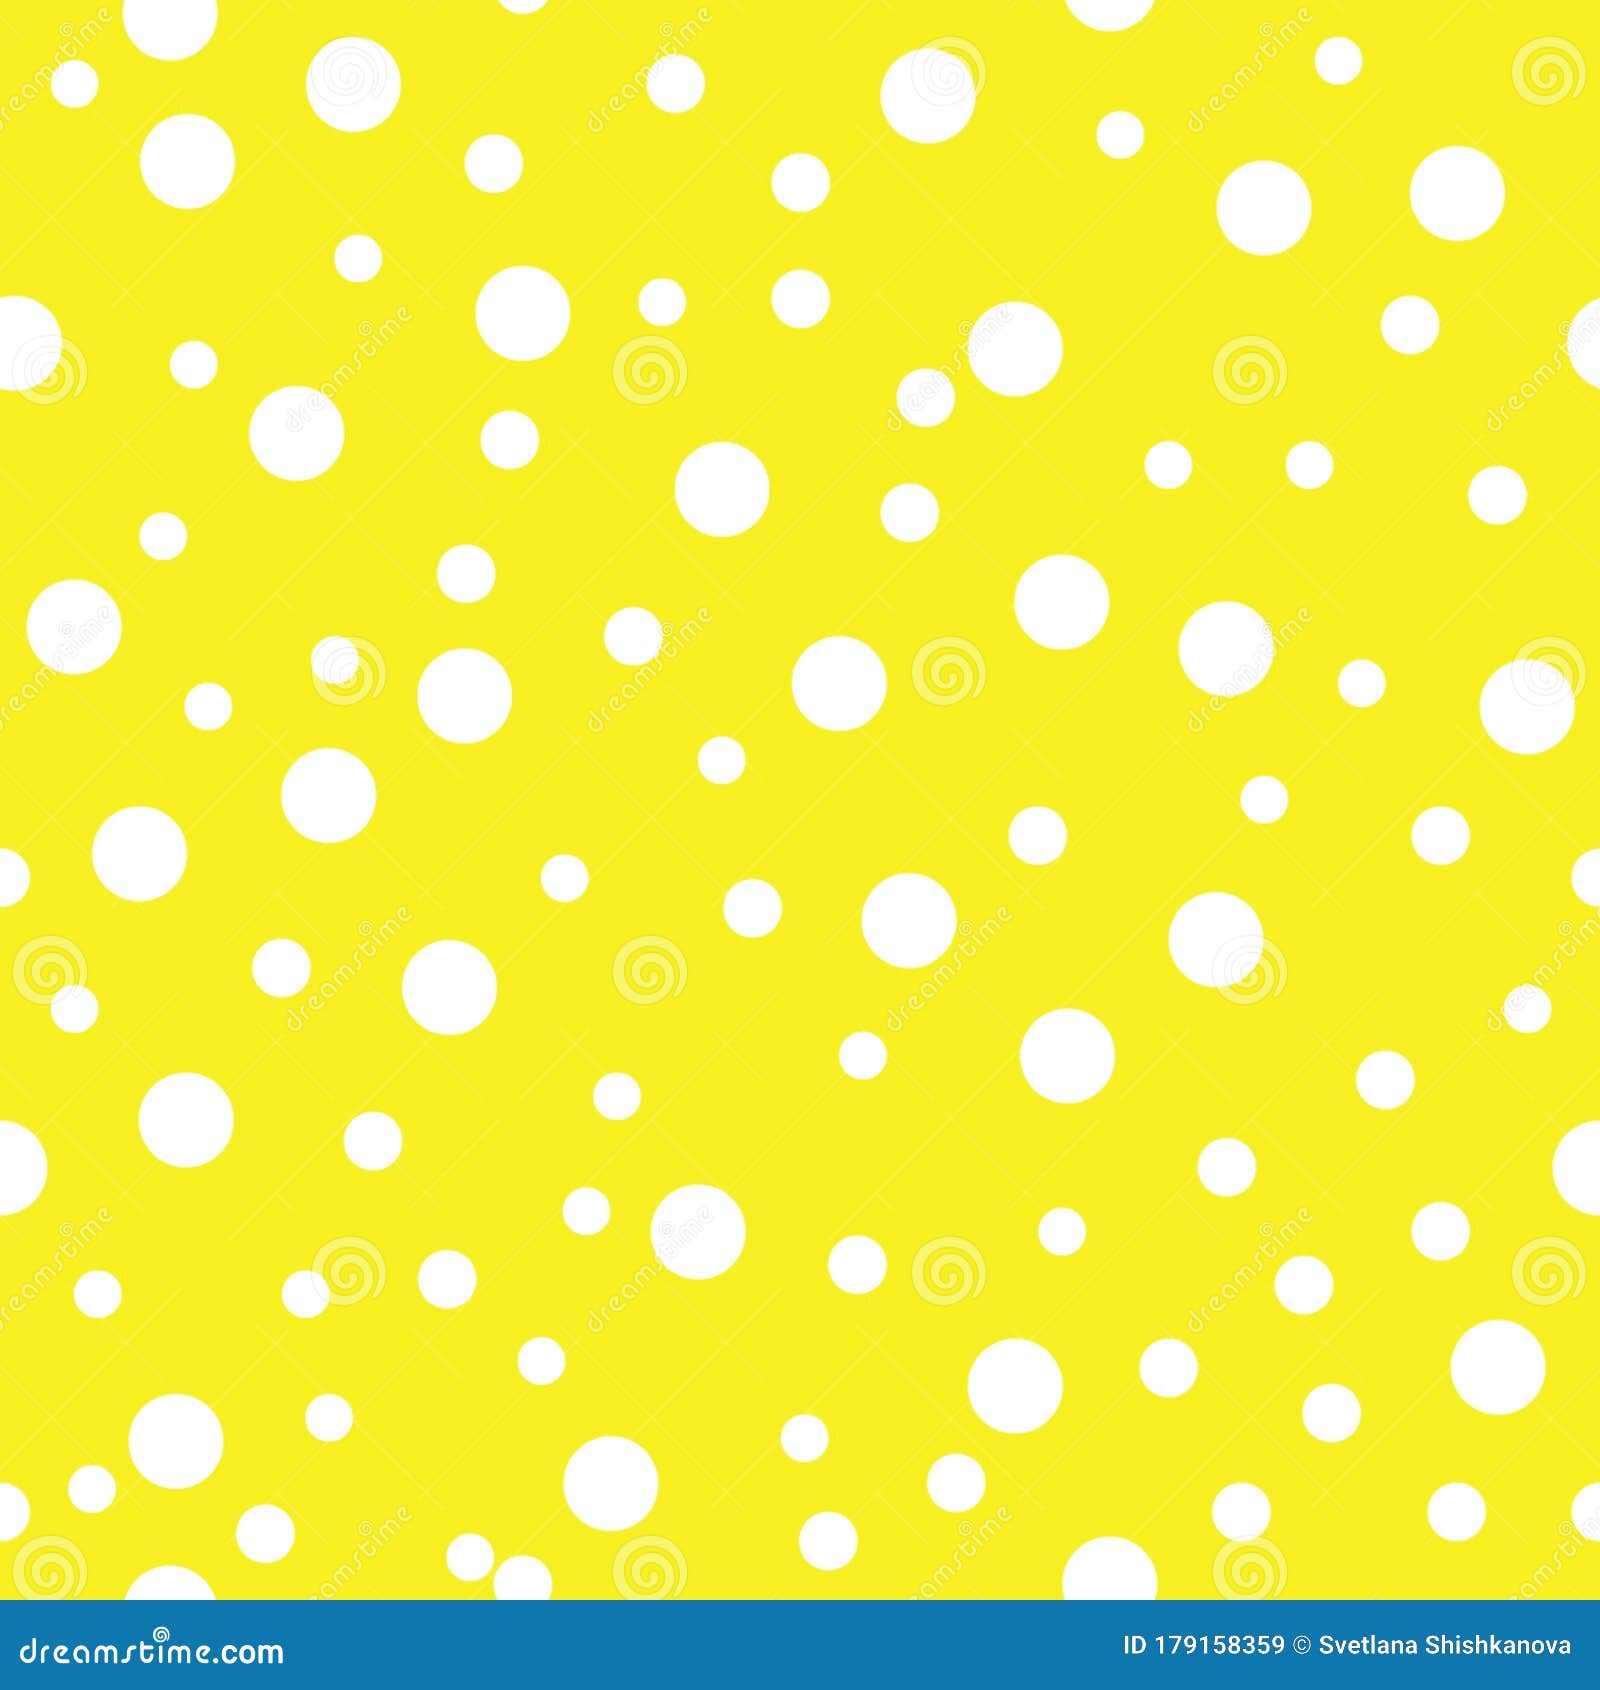 Dotted Seamless Pattern. White Polka Dot on Yellow Background Background.  Vector Illustration Stock Vector - Illustration of graphic, abstract:  179158359